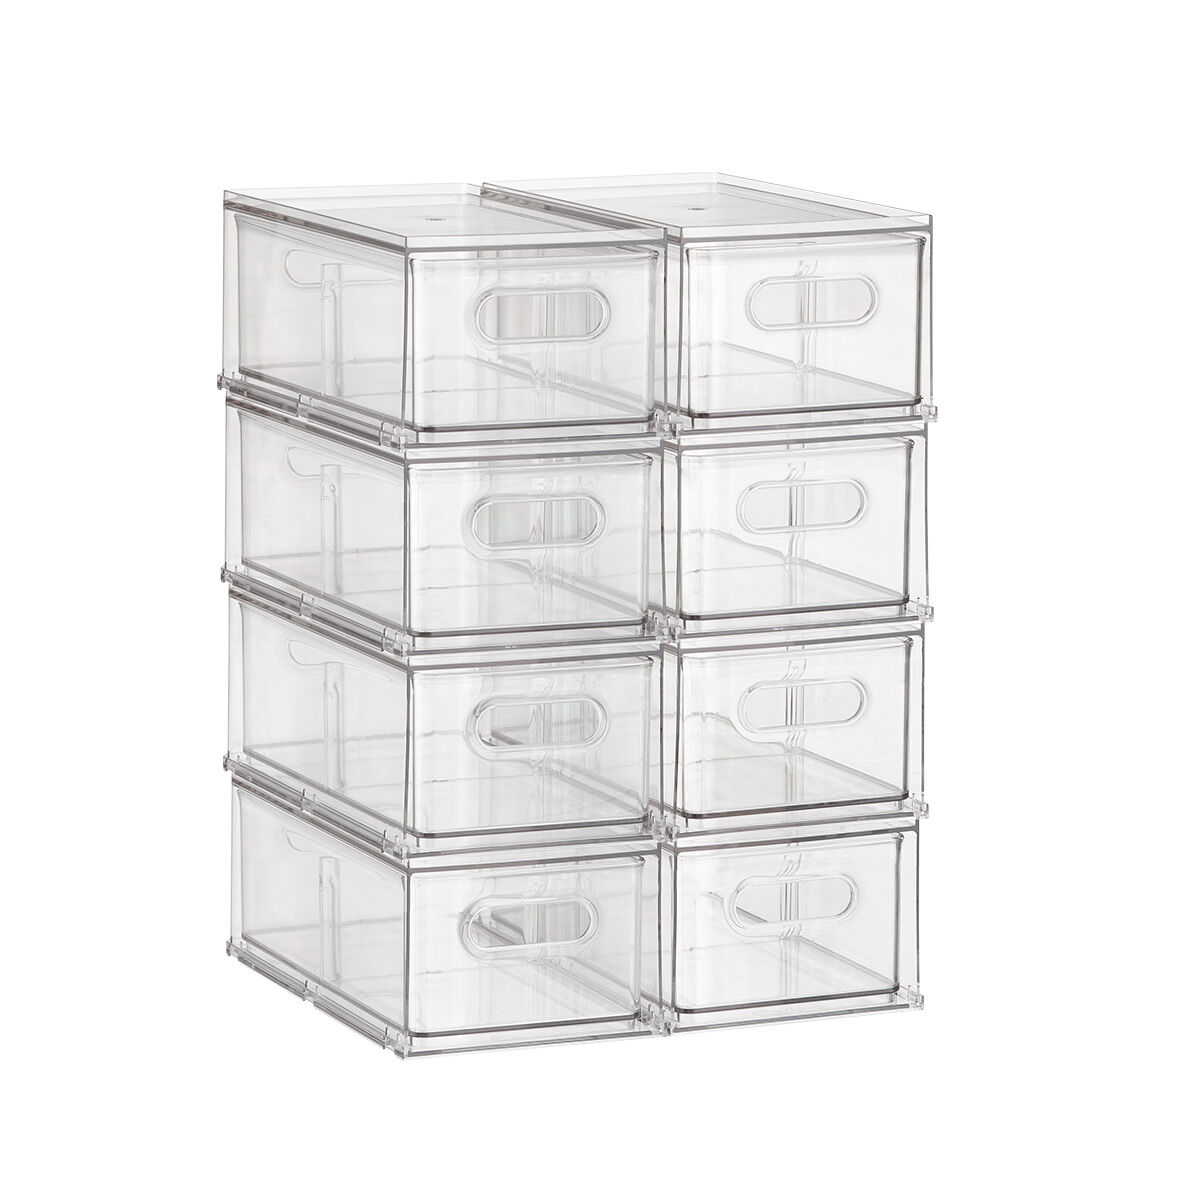 The Container Store Case of 8 T .H .E . Divided Fridge Drawer Clear